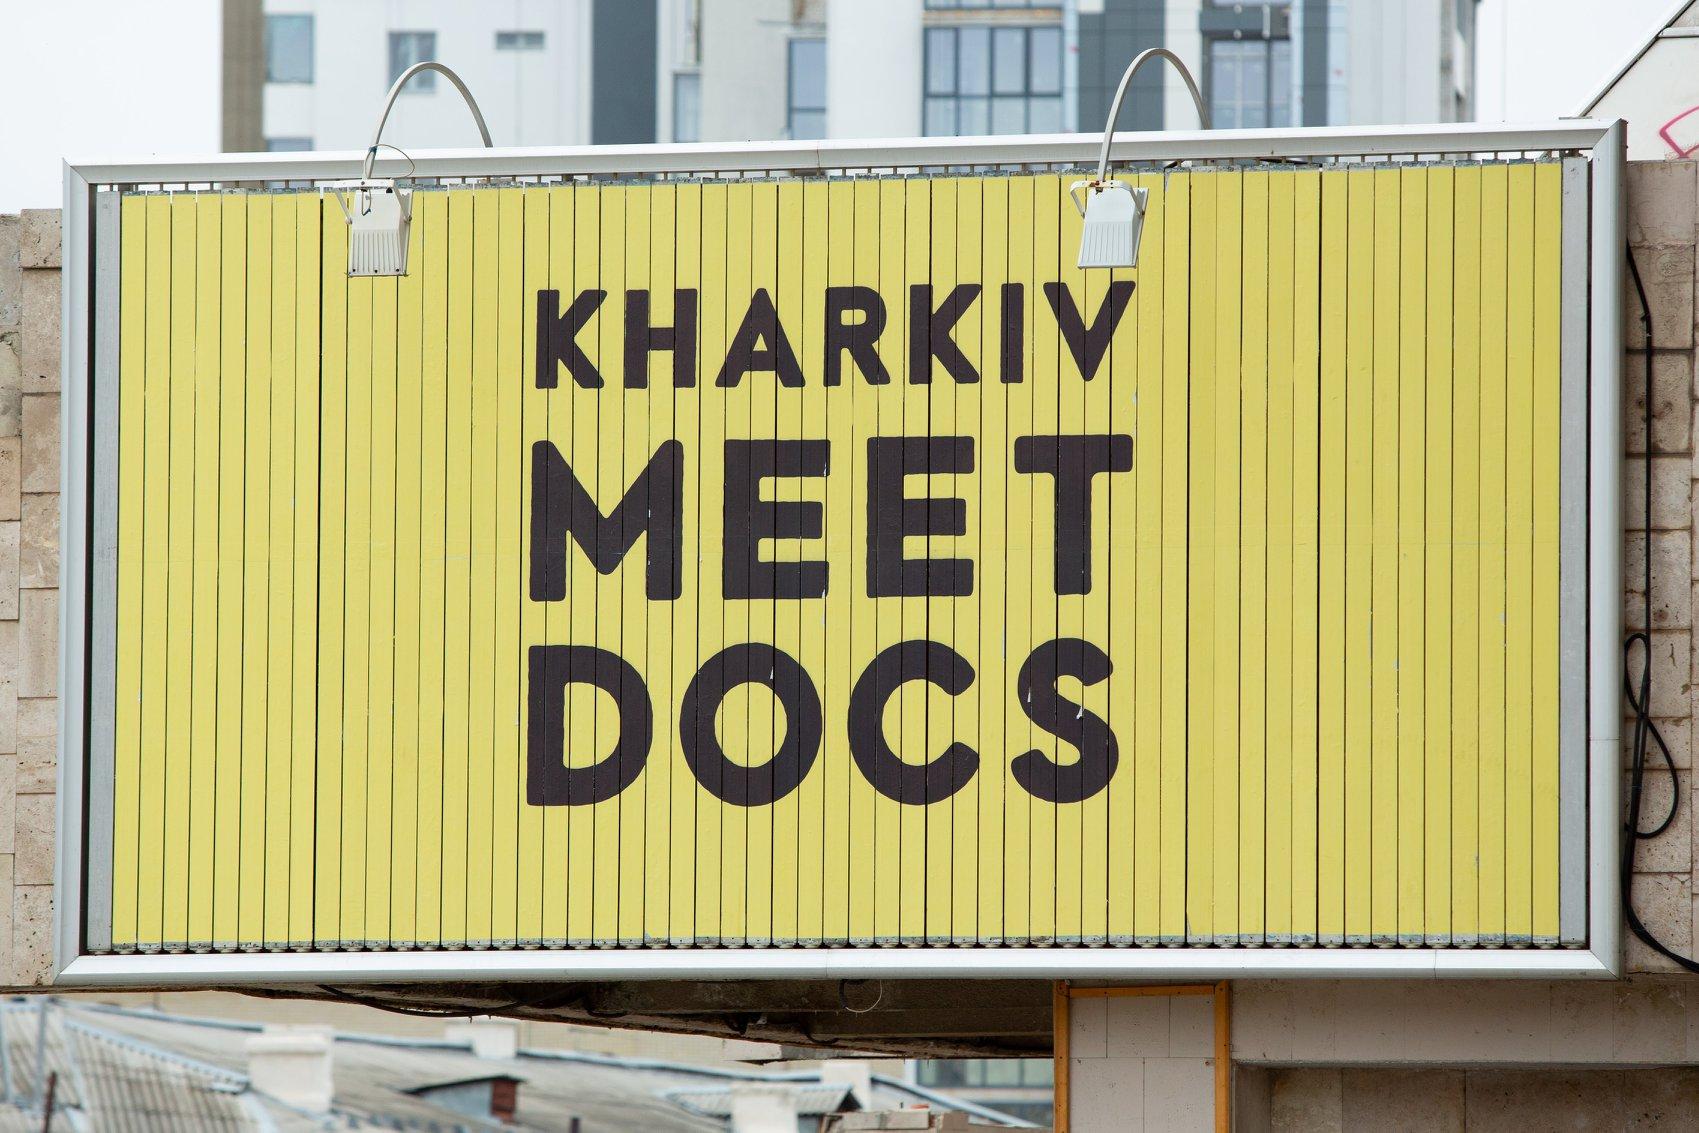 Kharkiv MeetDocs will take place from 1 to 6 October